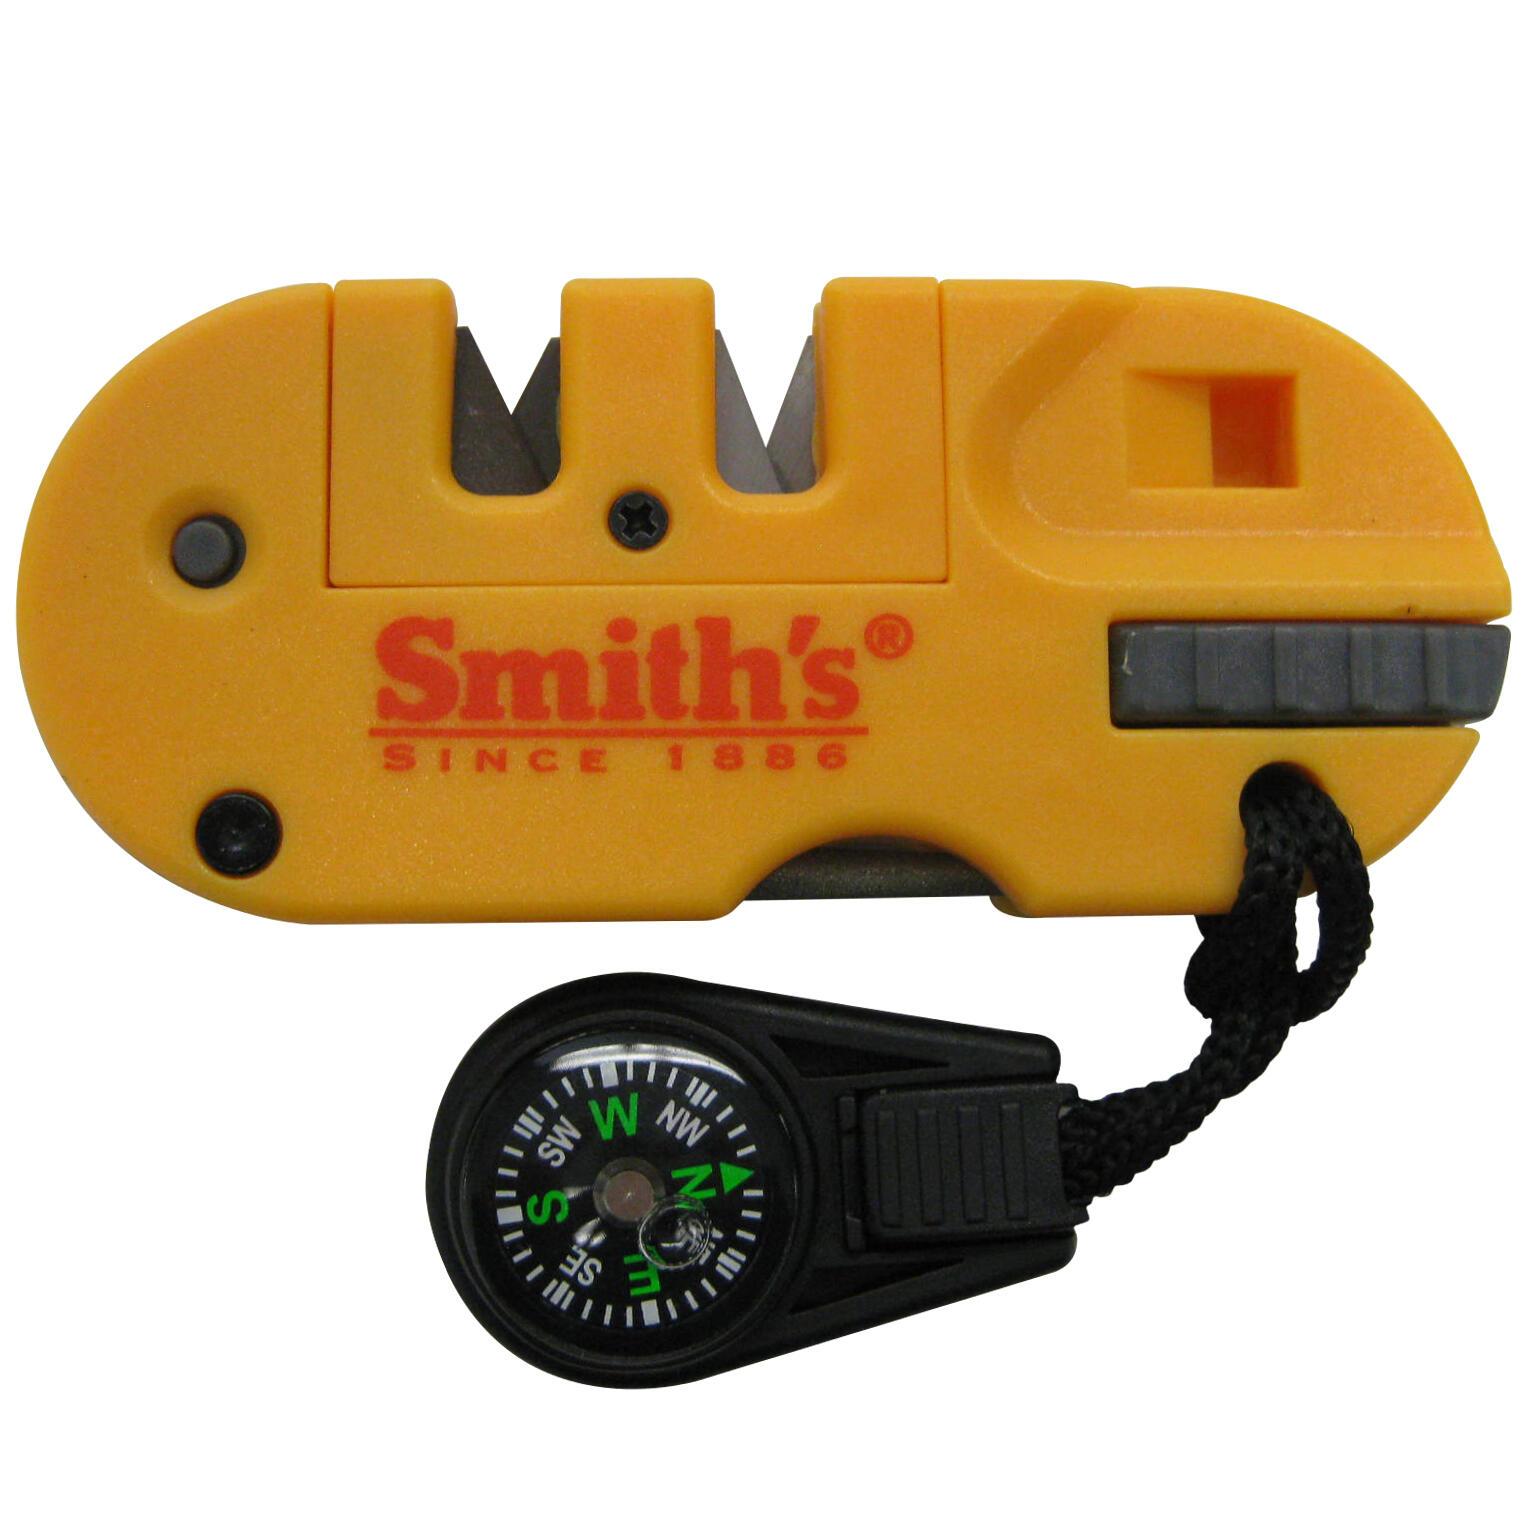 Smith's Sharpeners - Awesome Tools